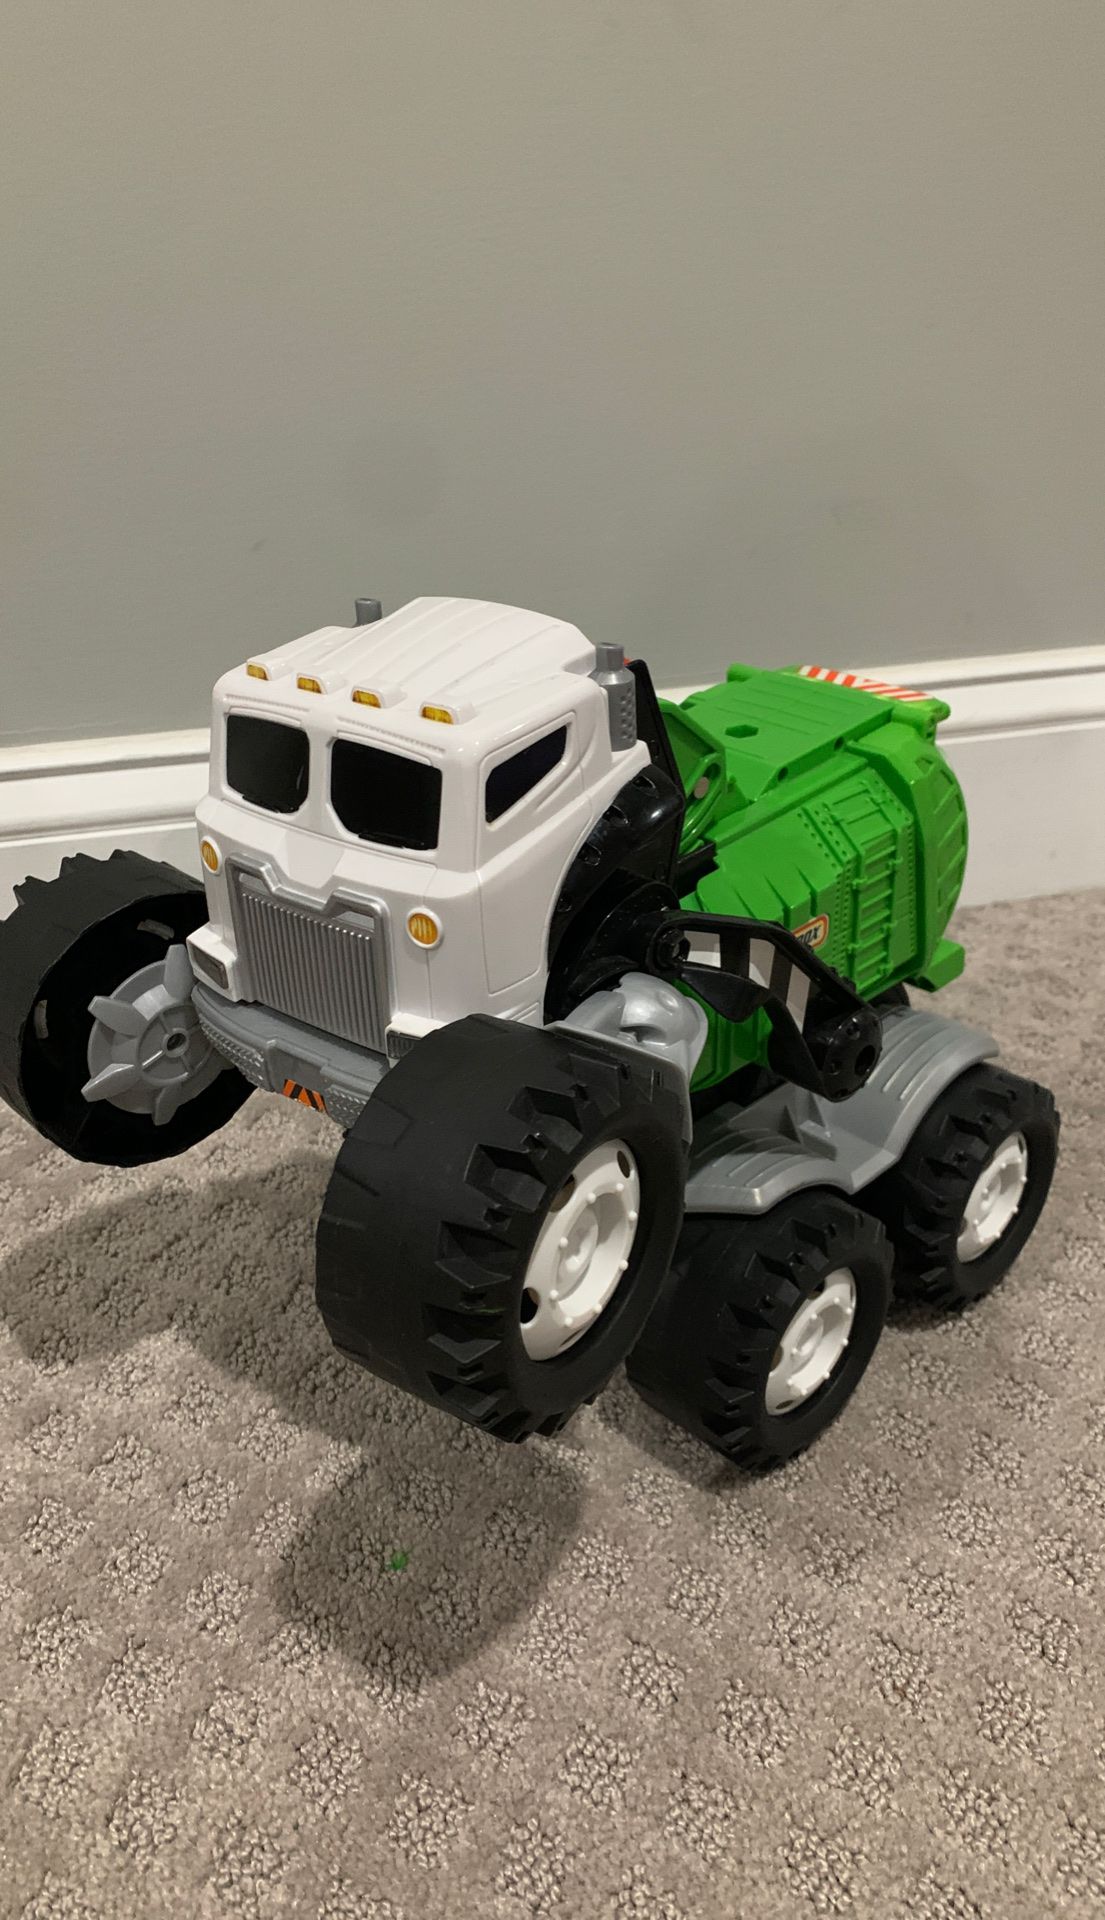 Monster garbage truck toy for kids